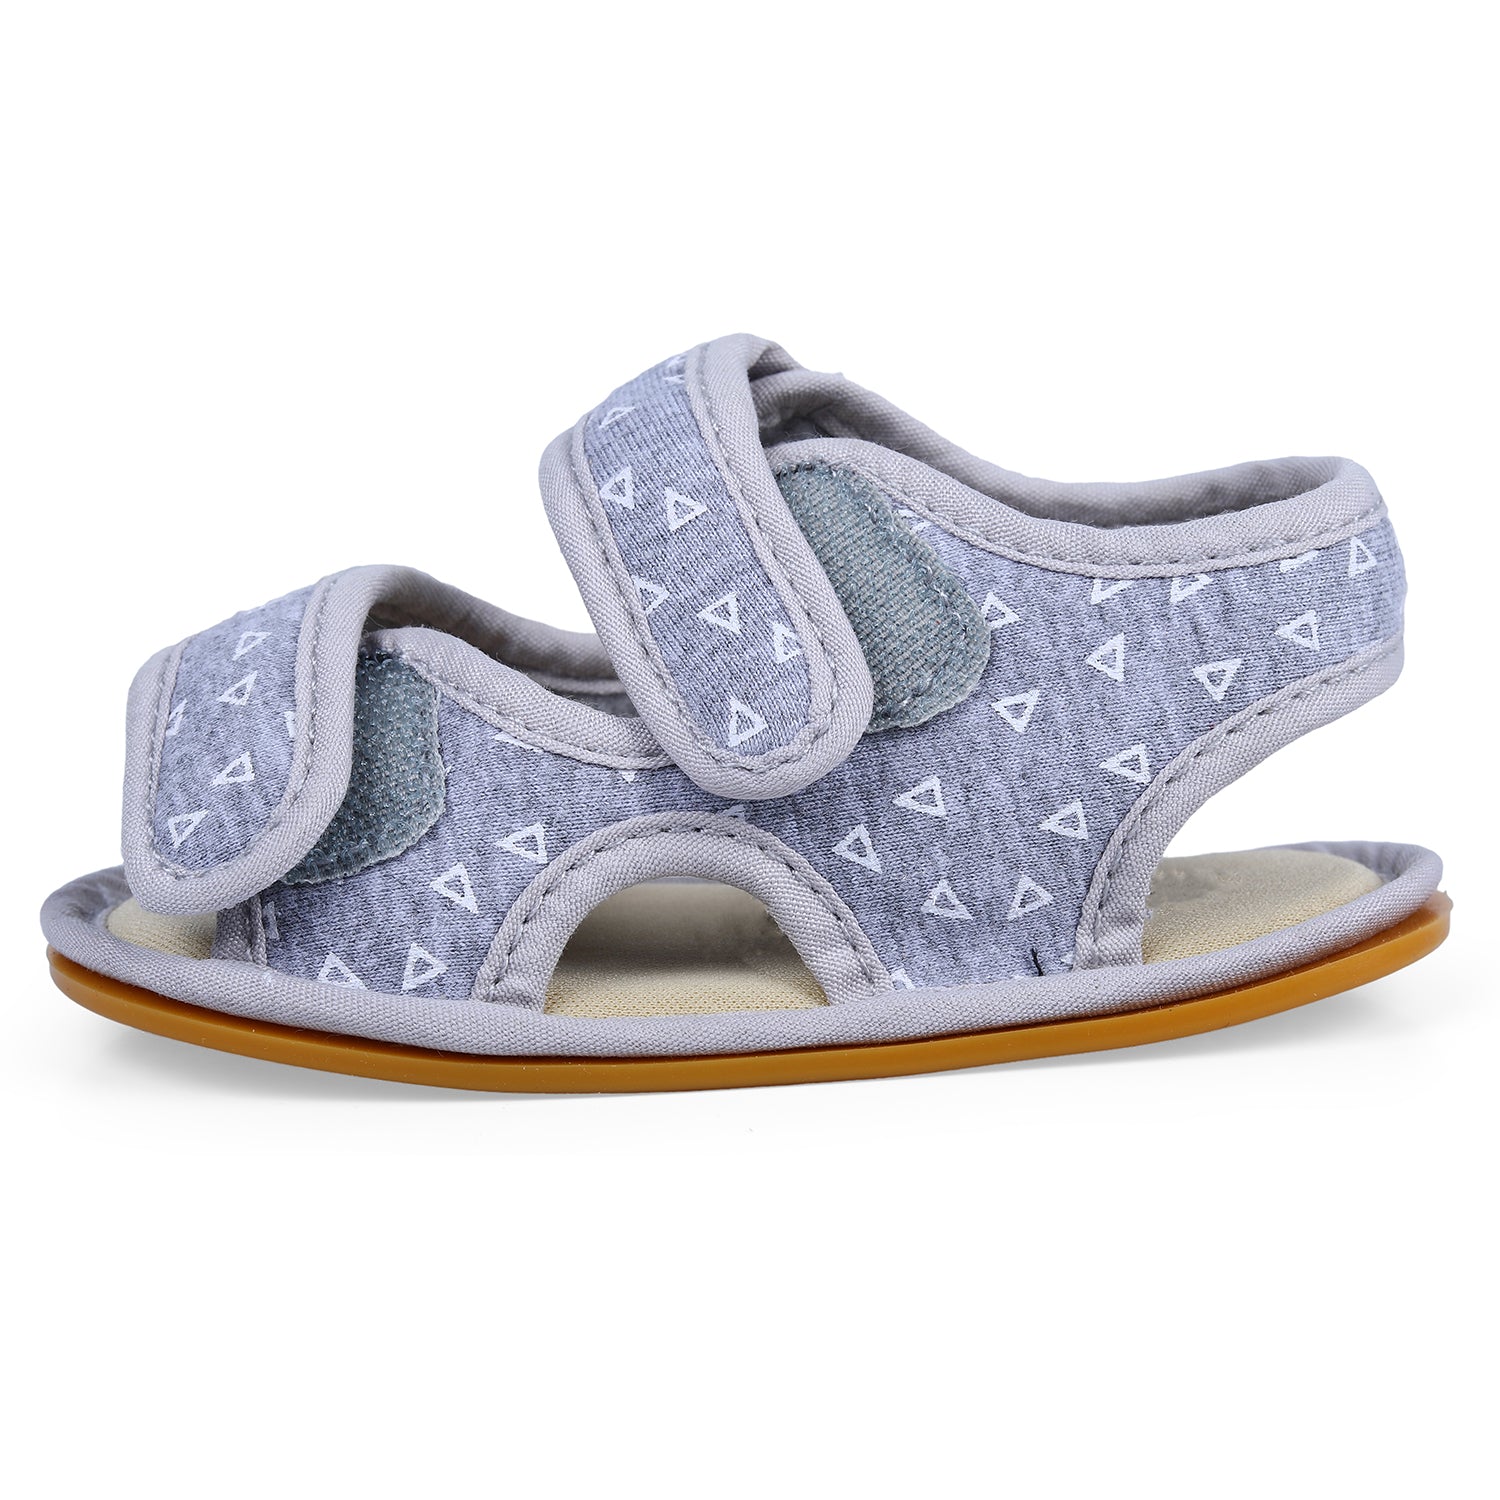 Triangle Comfortable Anti-skid Floater Sandals - Grey - Baby Moo